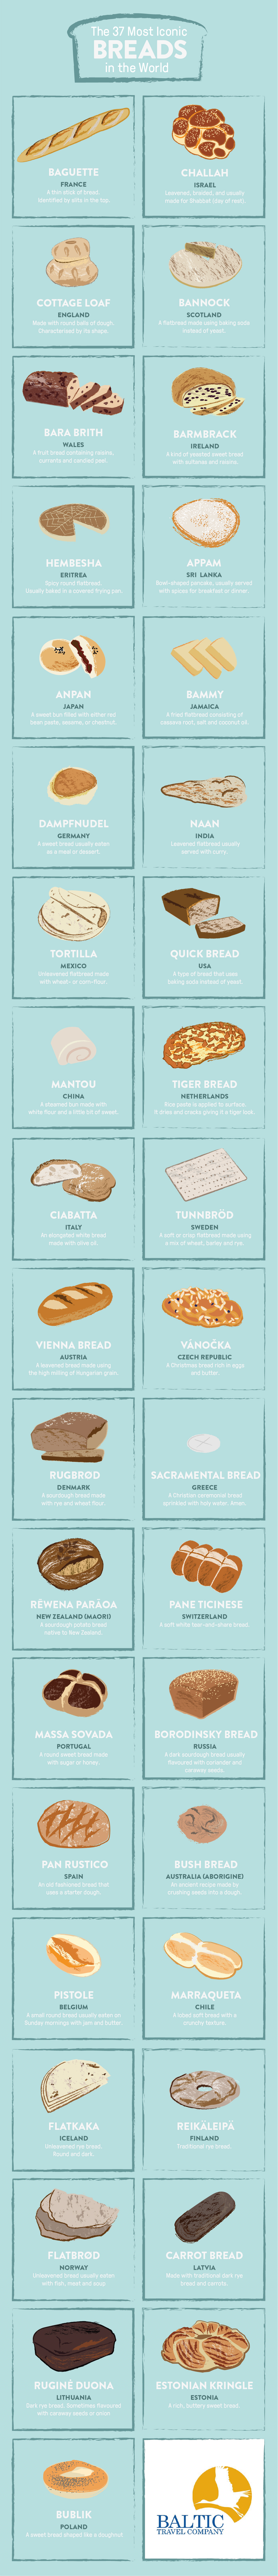 37 Iconic Breads from Around the World